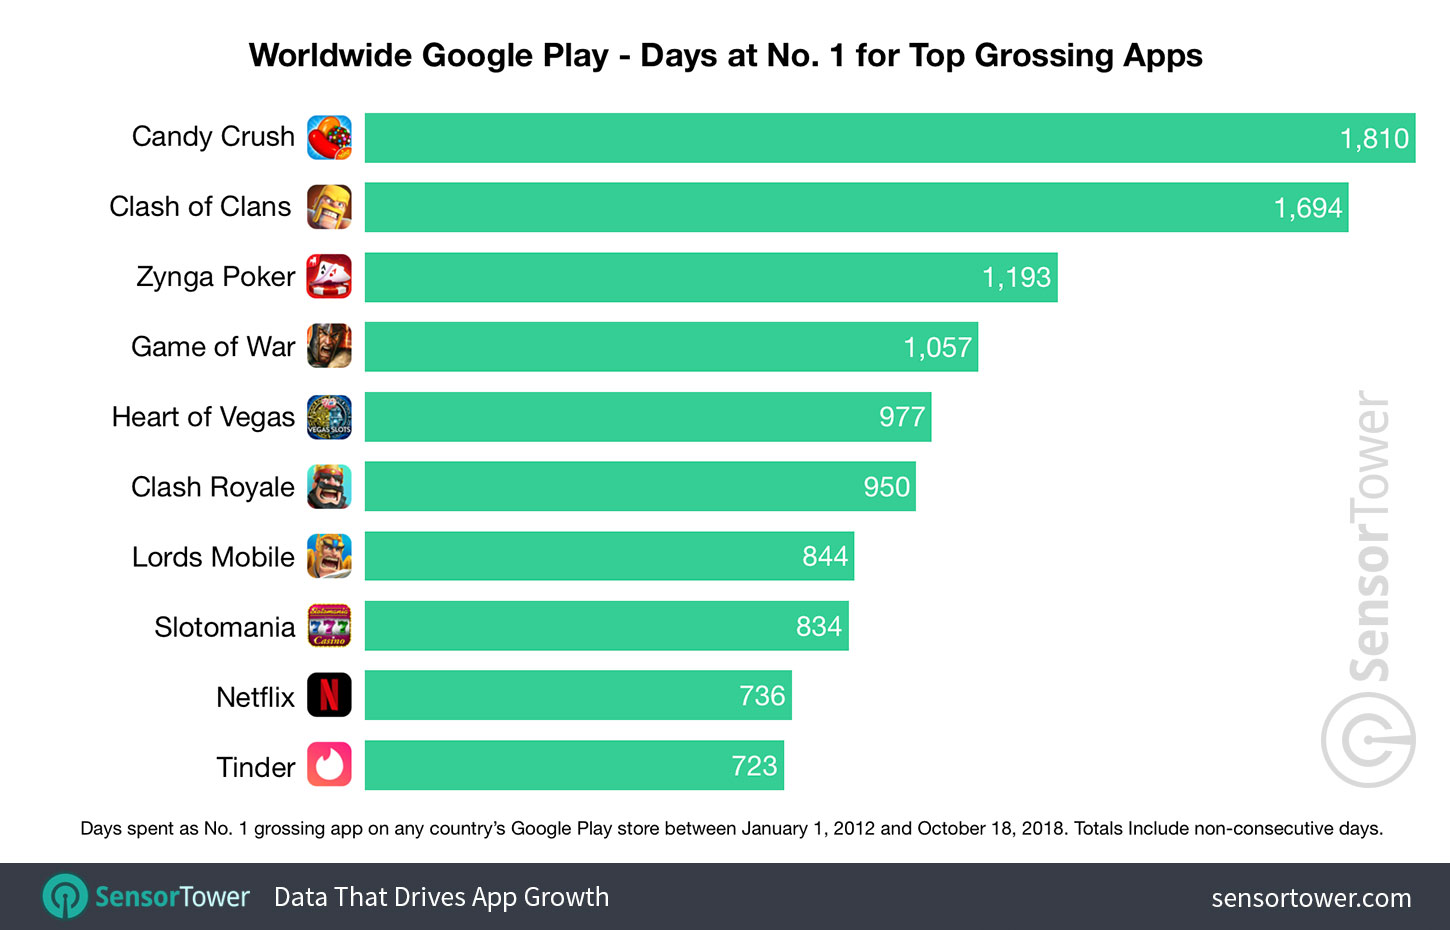 These Apps Games Have Spent the Most Time at No. 1 on Google Play